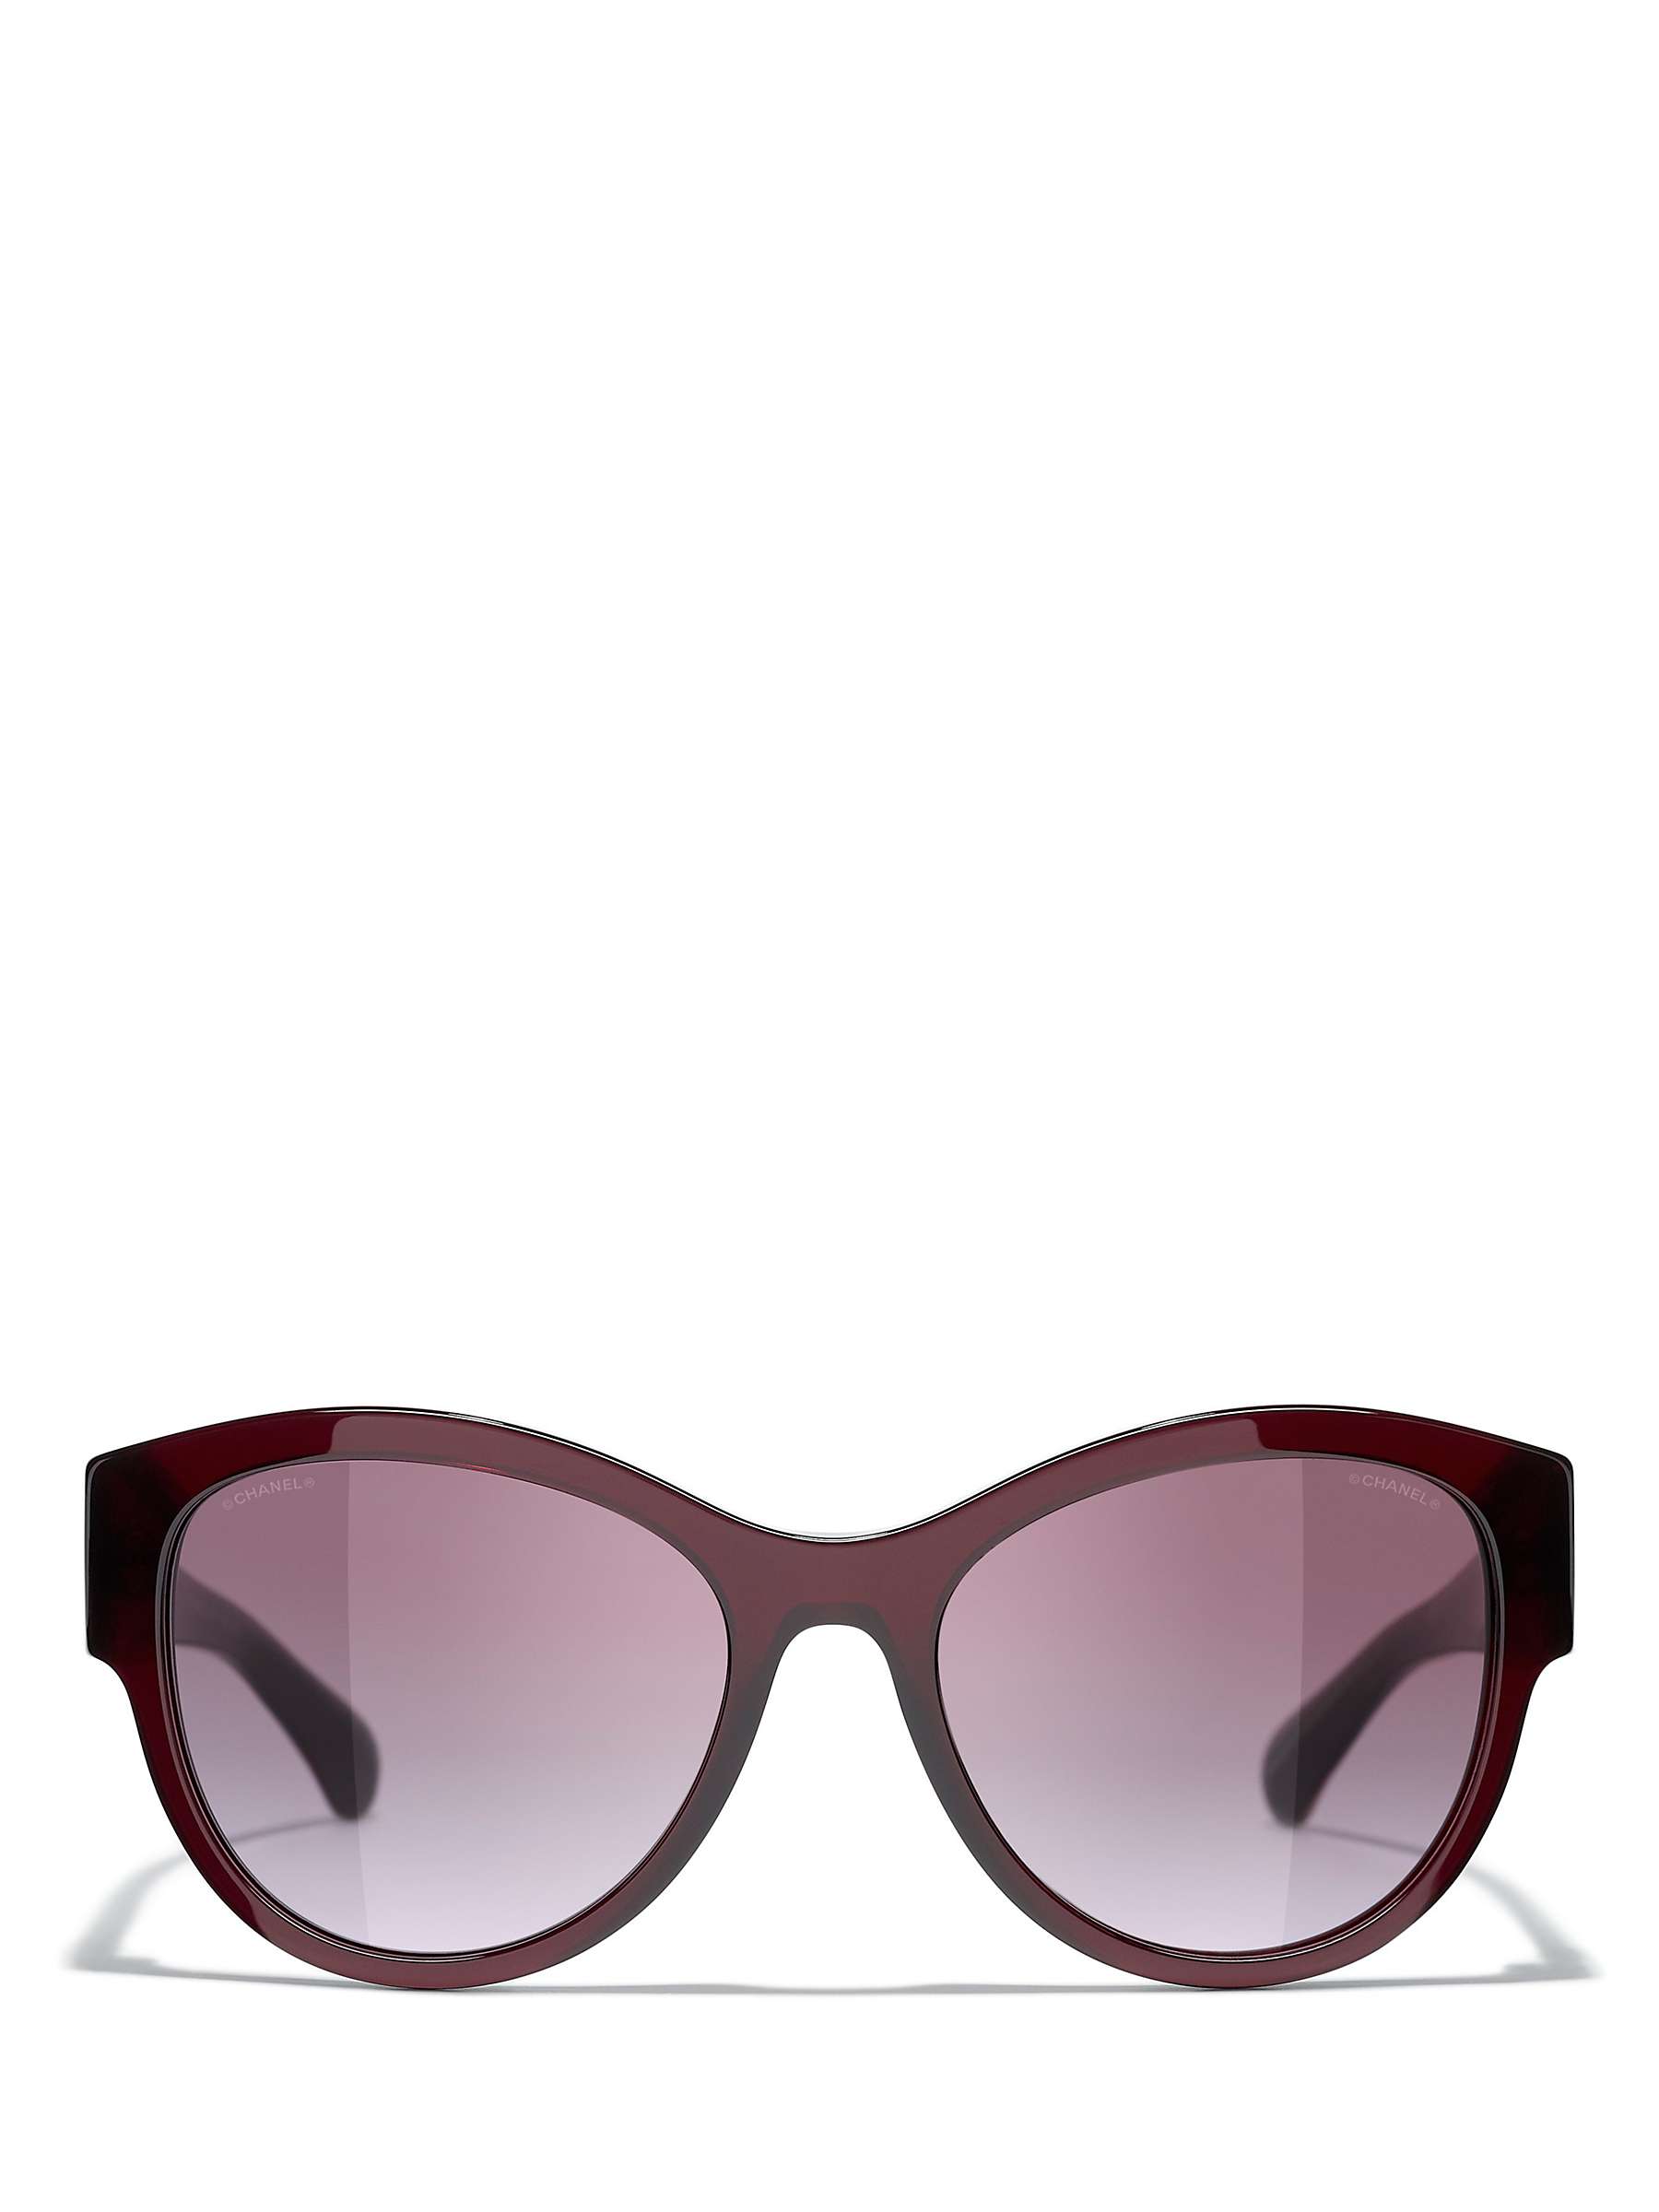 Buy CHANEL Oval Sunglasses CH5434 Dark Red/Pink Gradient Online at johnlewis.com